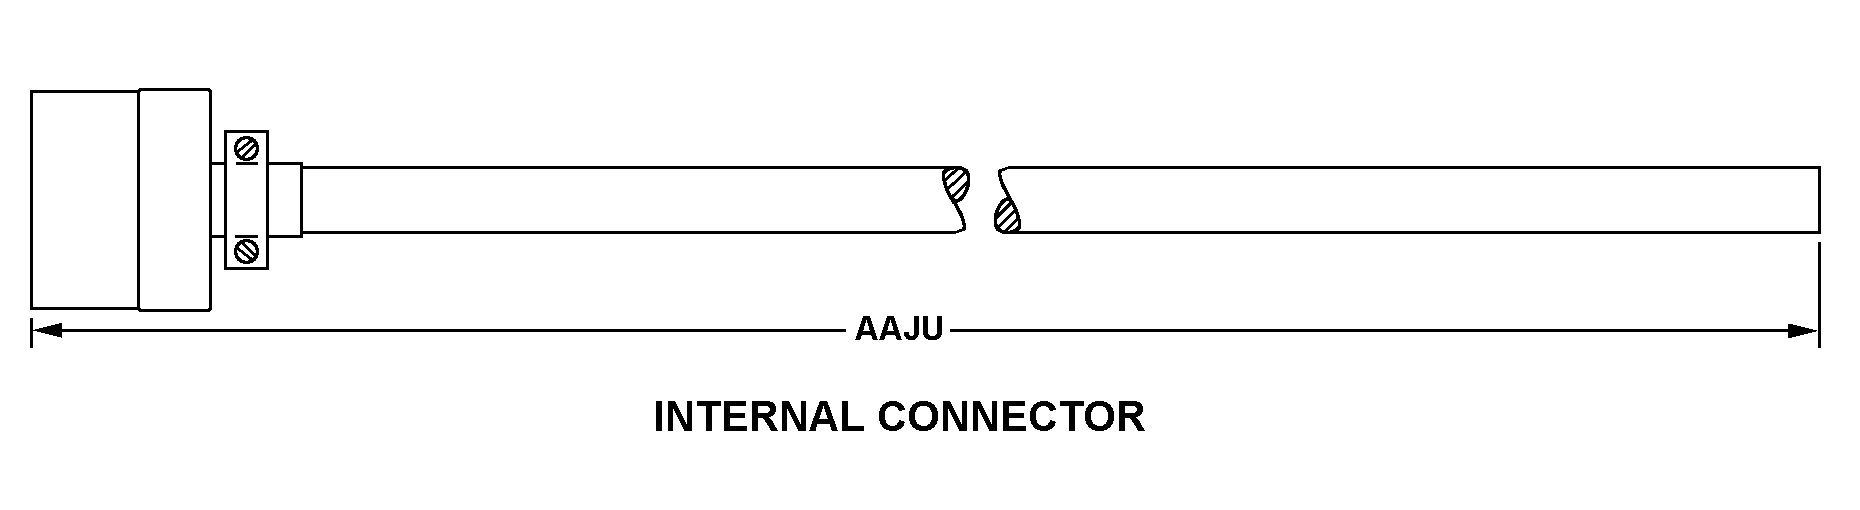 INTERNAL CONNECTOR style nsn 6150-01-524-6771